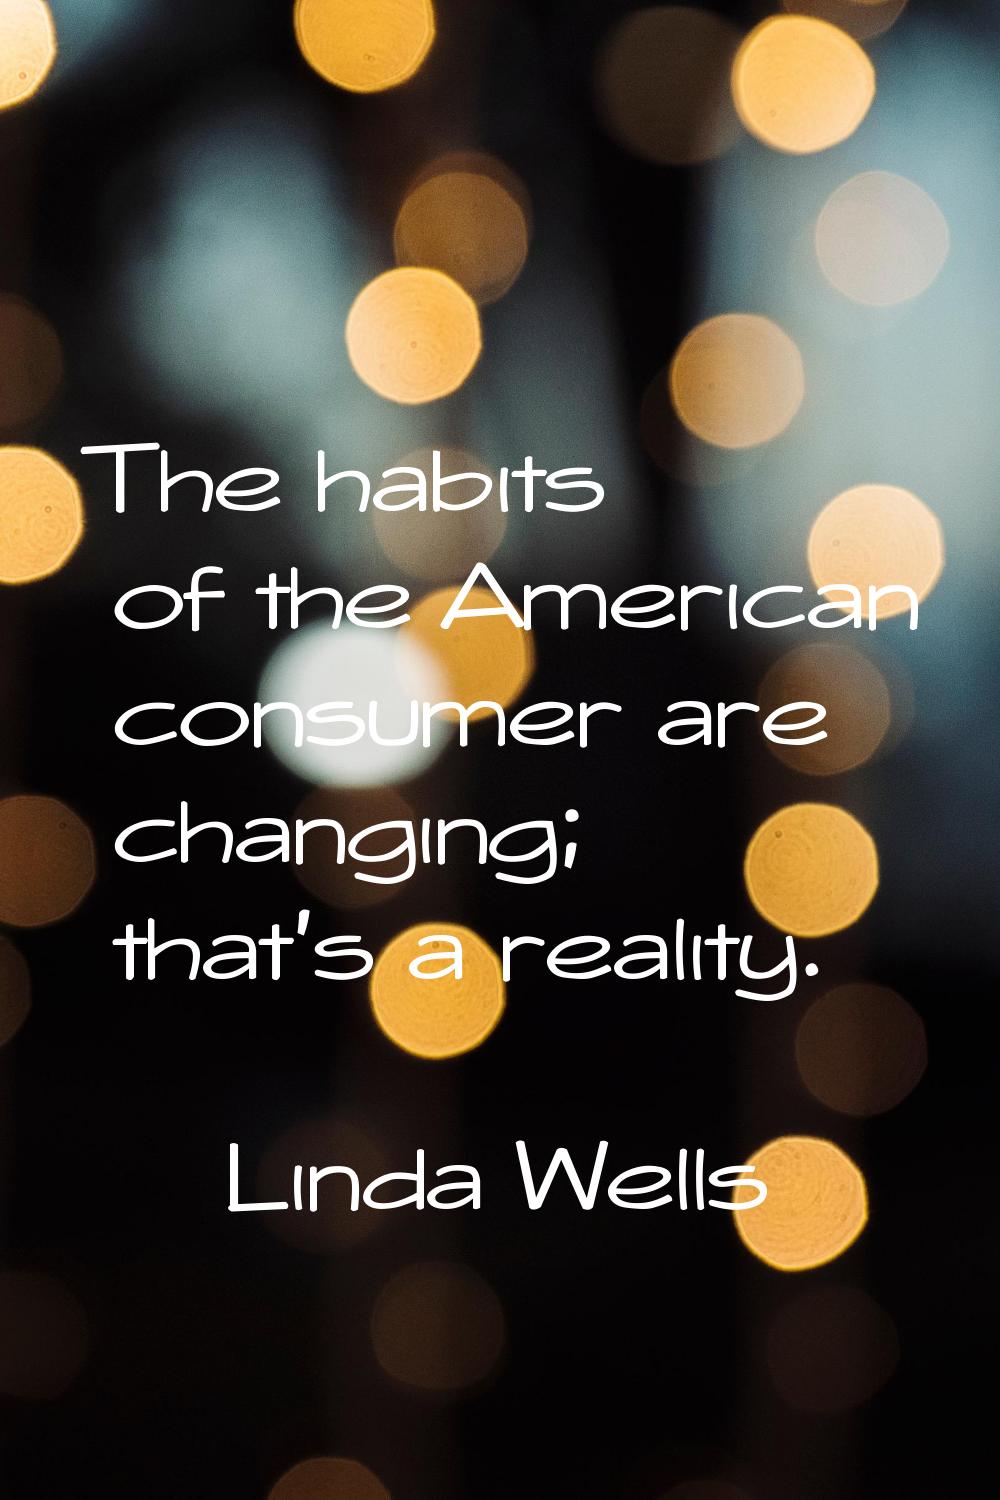 The habits of the American consumer are changing; that's a reality.